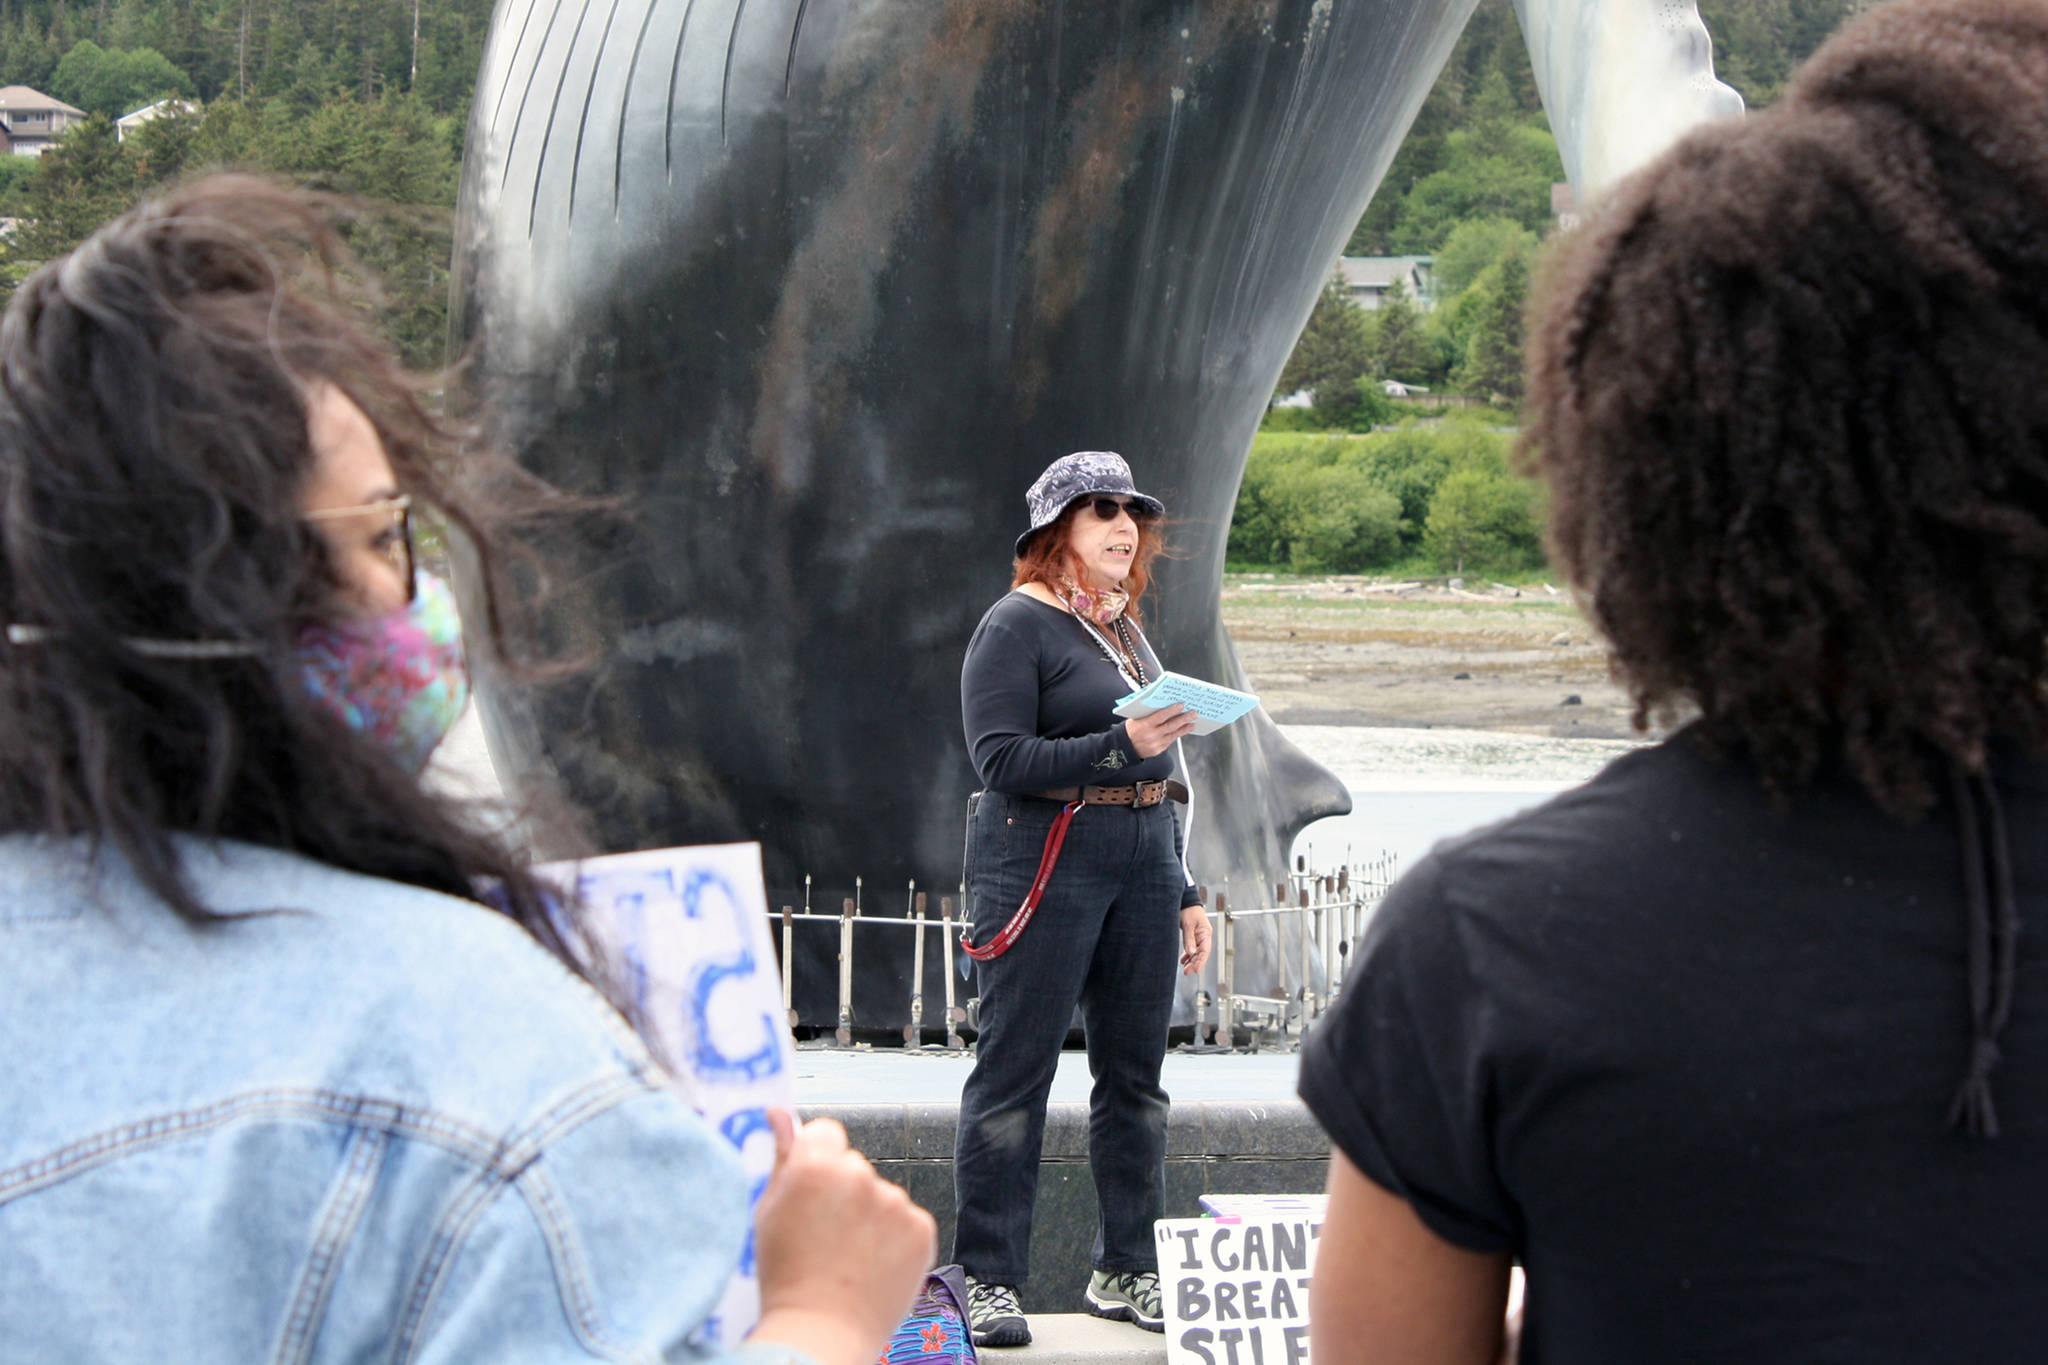 Christianne Carrillo and Jennifer Gross listen while Gloria Merry talks to begin the “I Can’t Breathe” vigil held Saturday, May 30 at Mayor Bill Overstreet Park. Most attendees wore masks, many brought protest signs, and the event was peaceful. (Ben Hohenstatt | Juneau Empire)